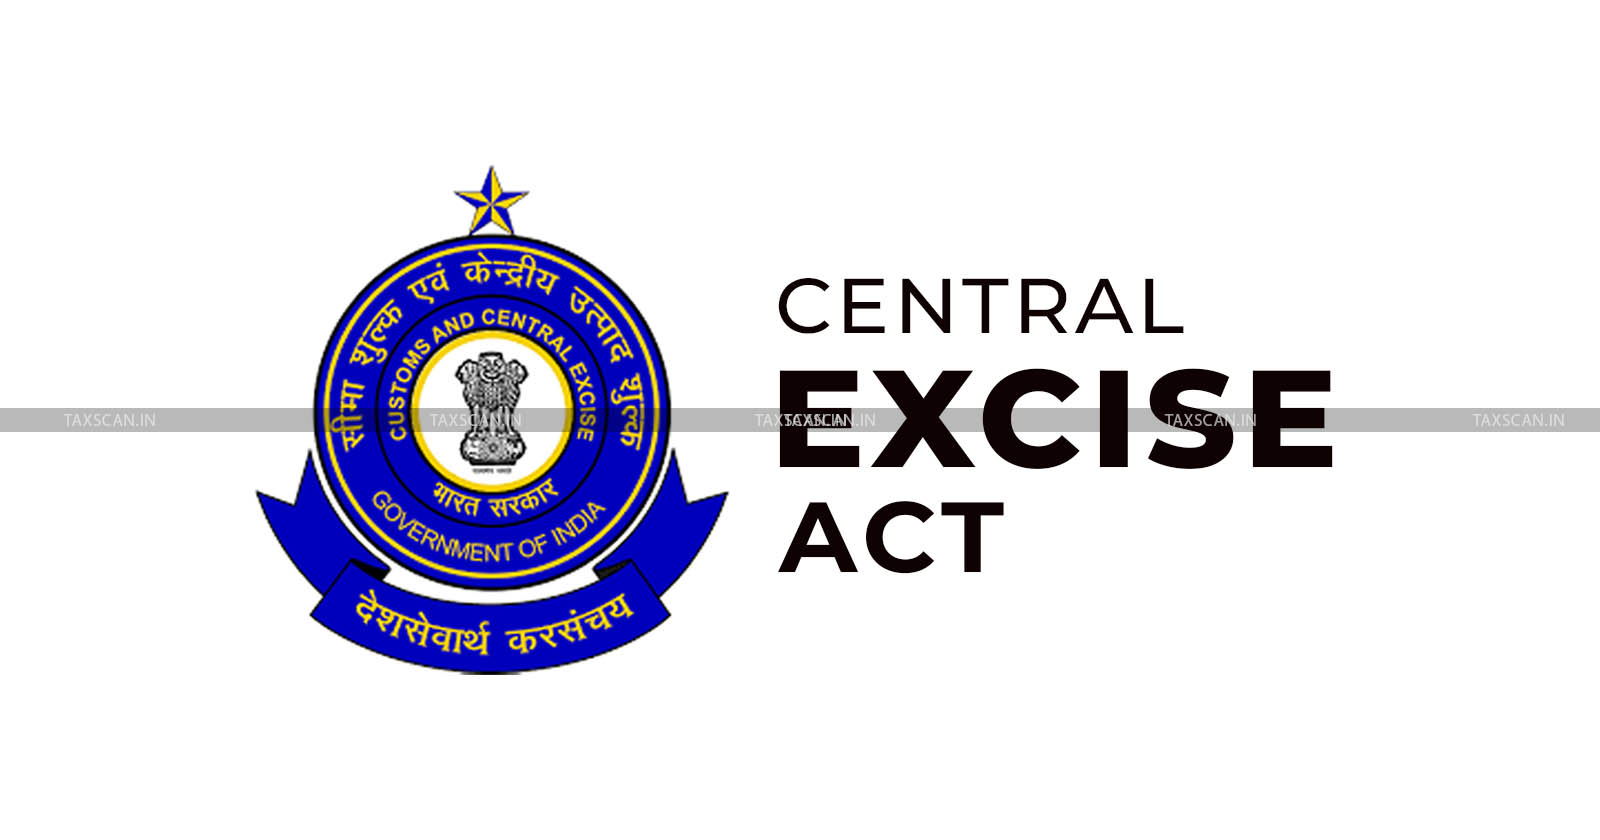 Amount - pre-deposit Central Excise Act - interest - CESTAT - Amount deposited as pre-deposit - Central Excise Act subject to refund along with interest - taxscan